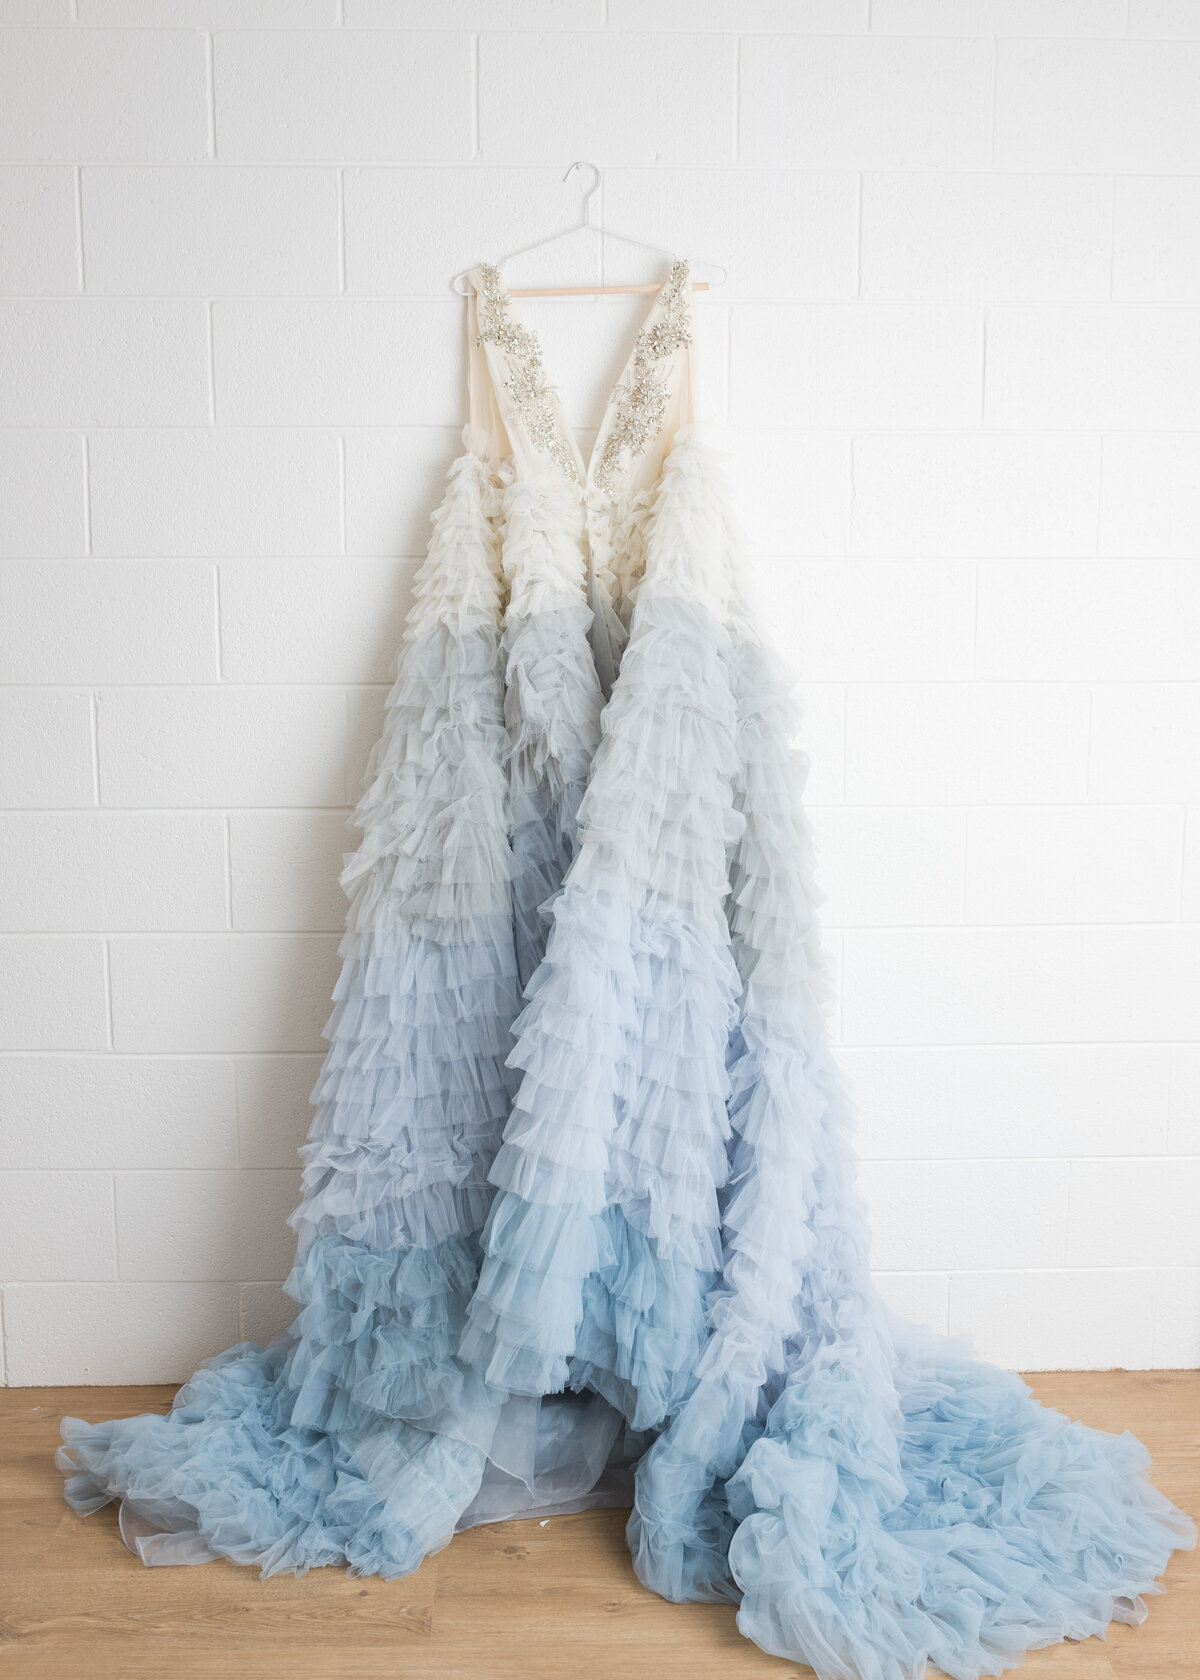 Before and Ever Couture Gown "Celeste"  in white and blue. Client Wardrobe image by Lauren Vanier Photography